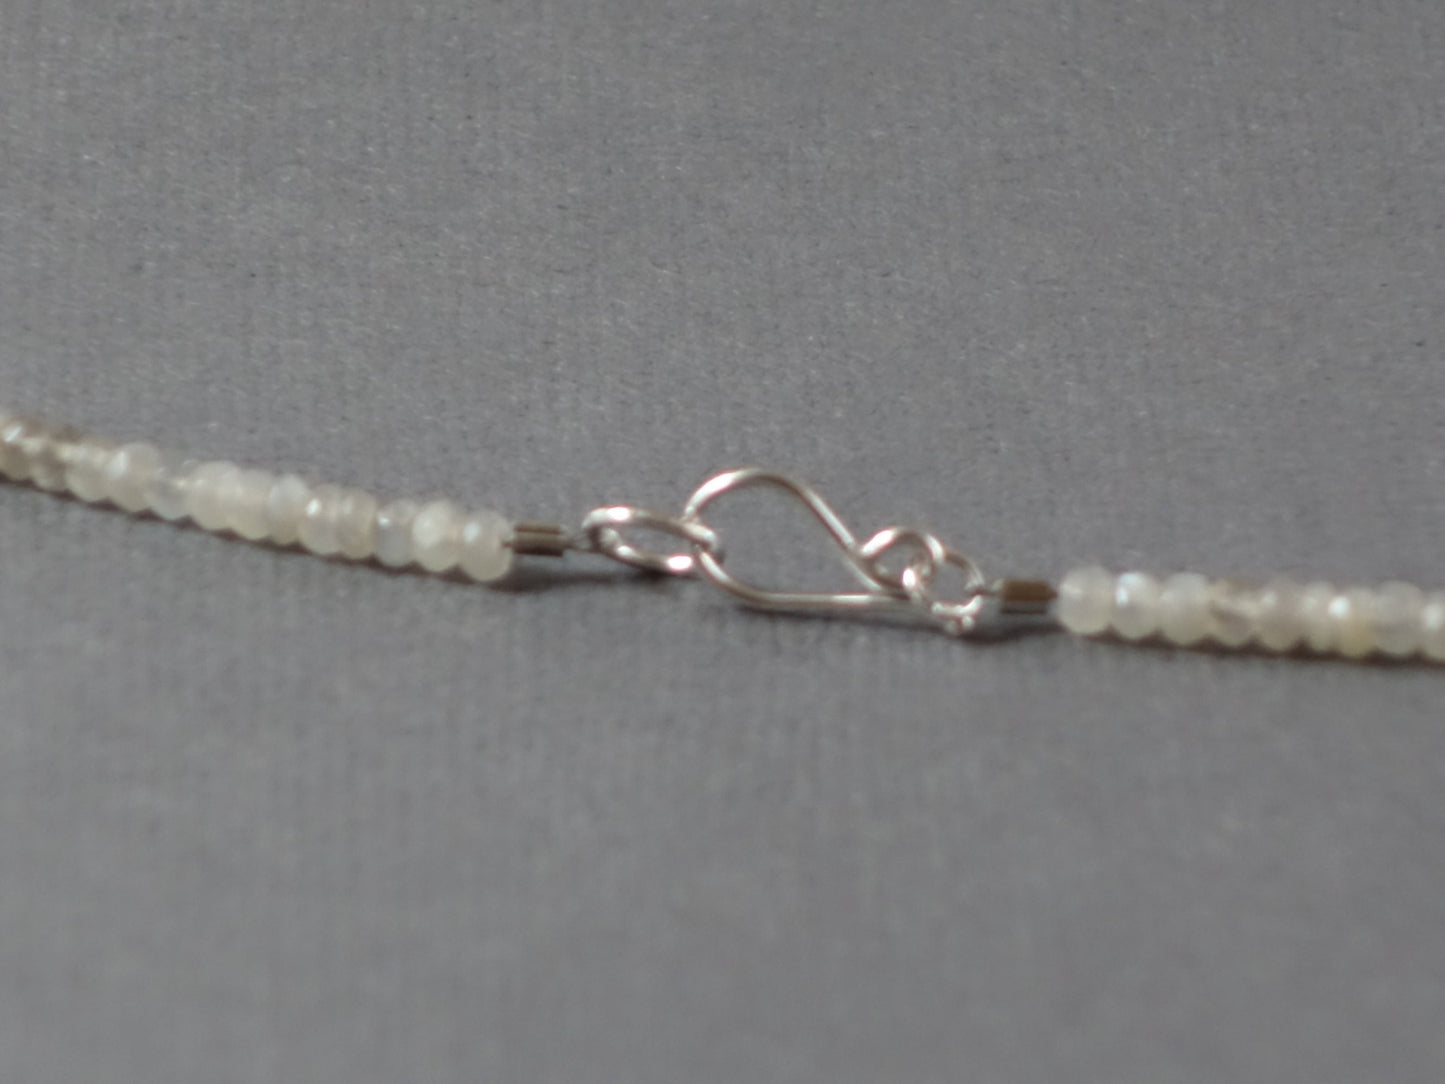 Moonstone Necklace with 14k Gold Clasp, Beaded Moonstone Necklace, 17.75 inches, Gray Moonstone Necklace, Gray Necklace